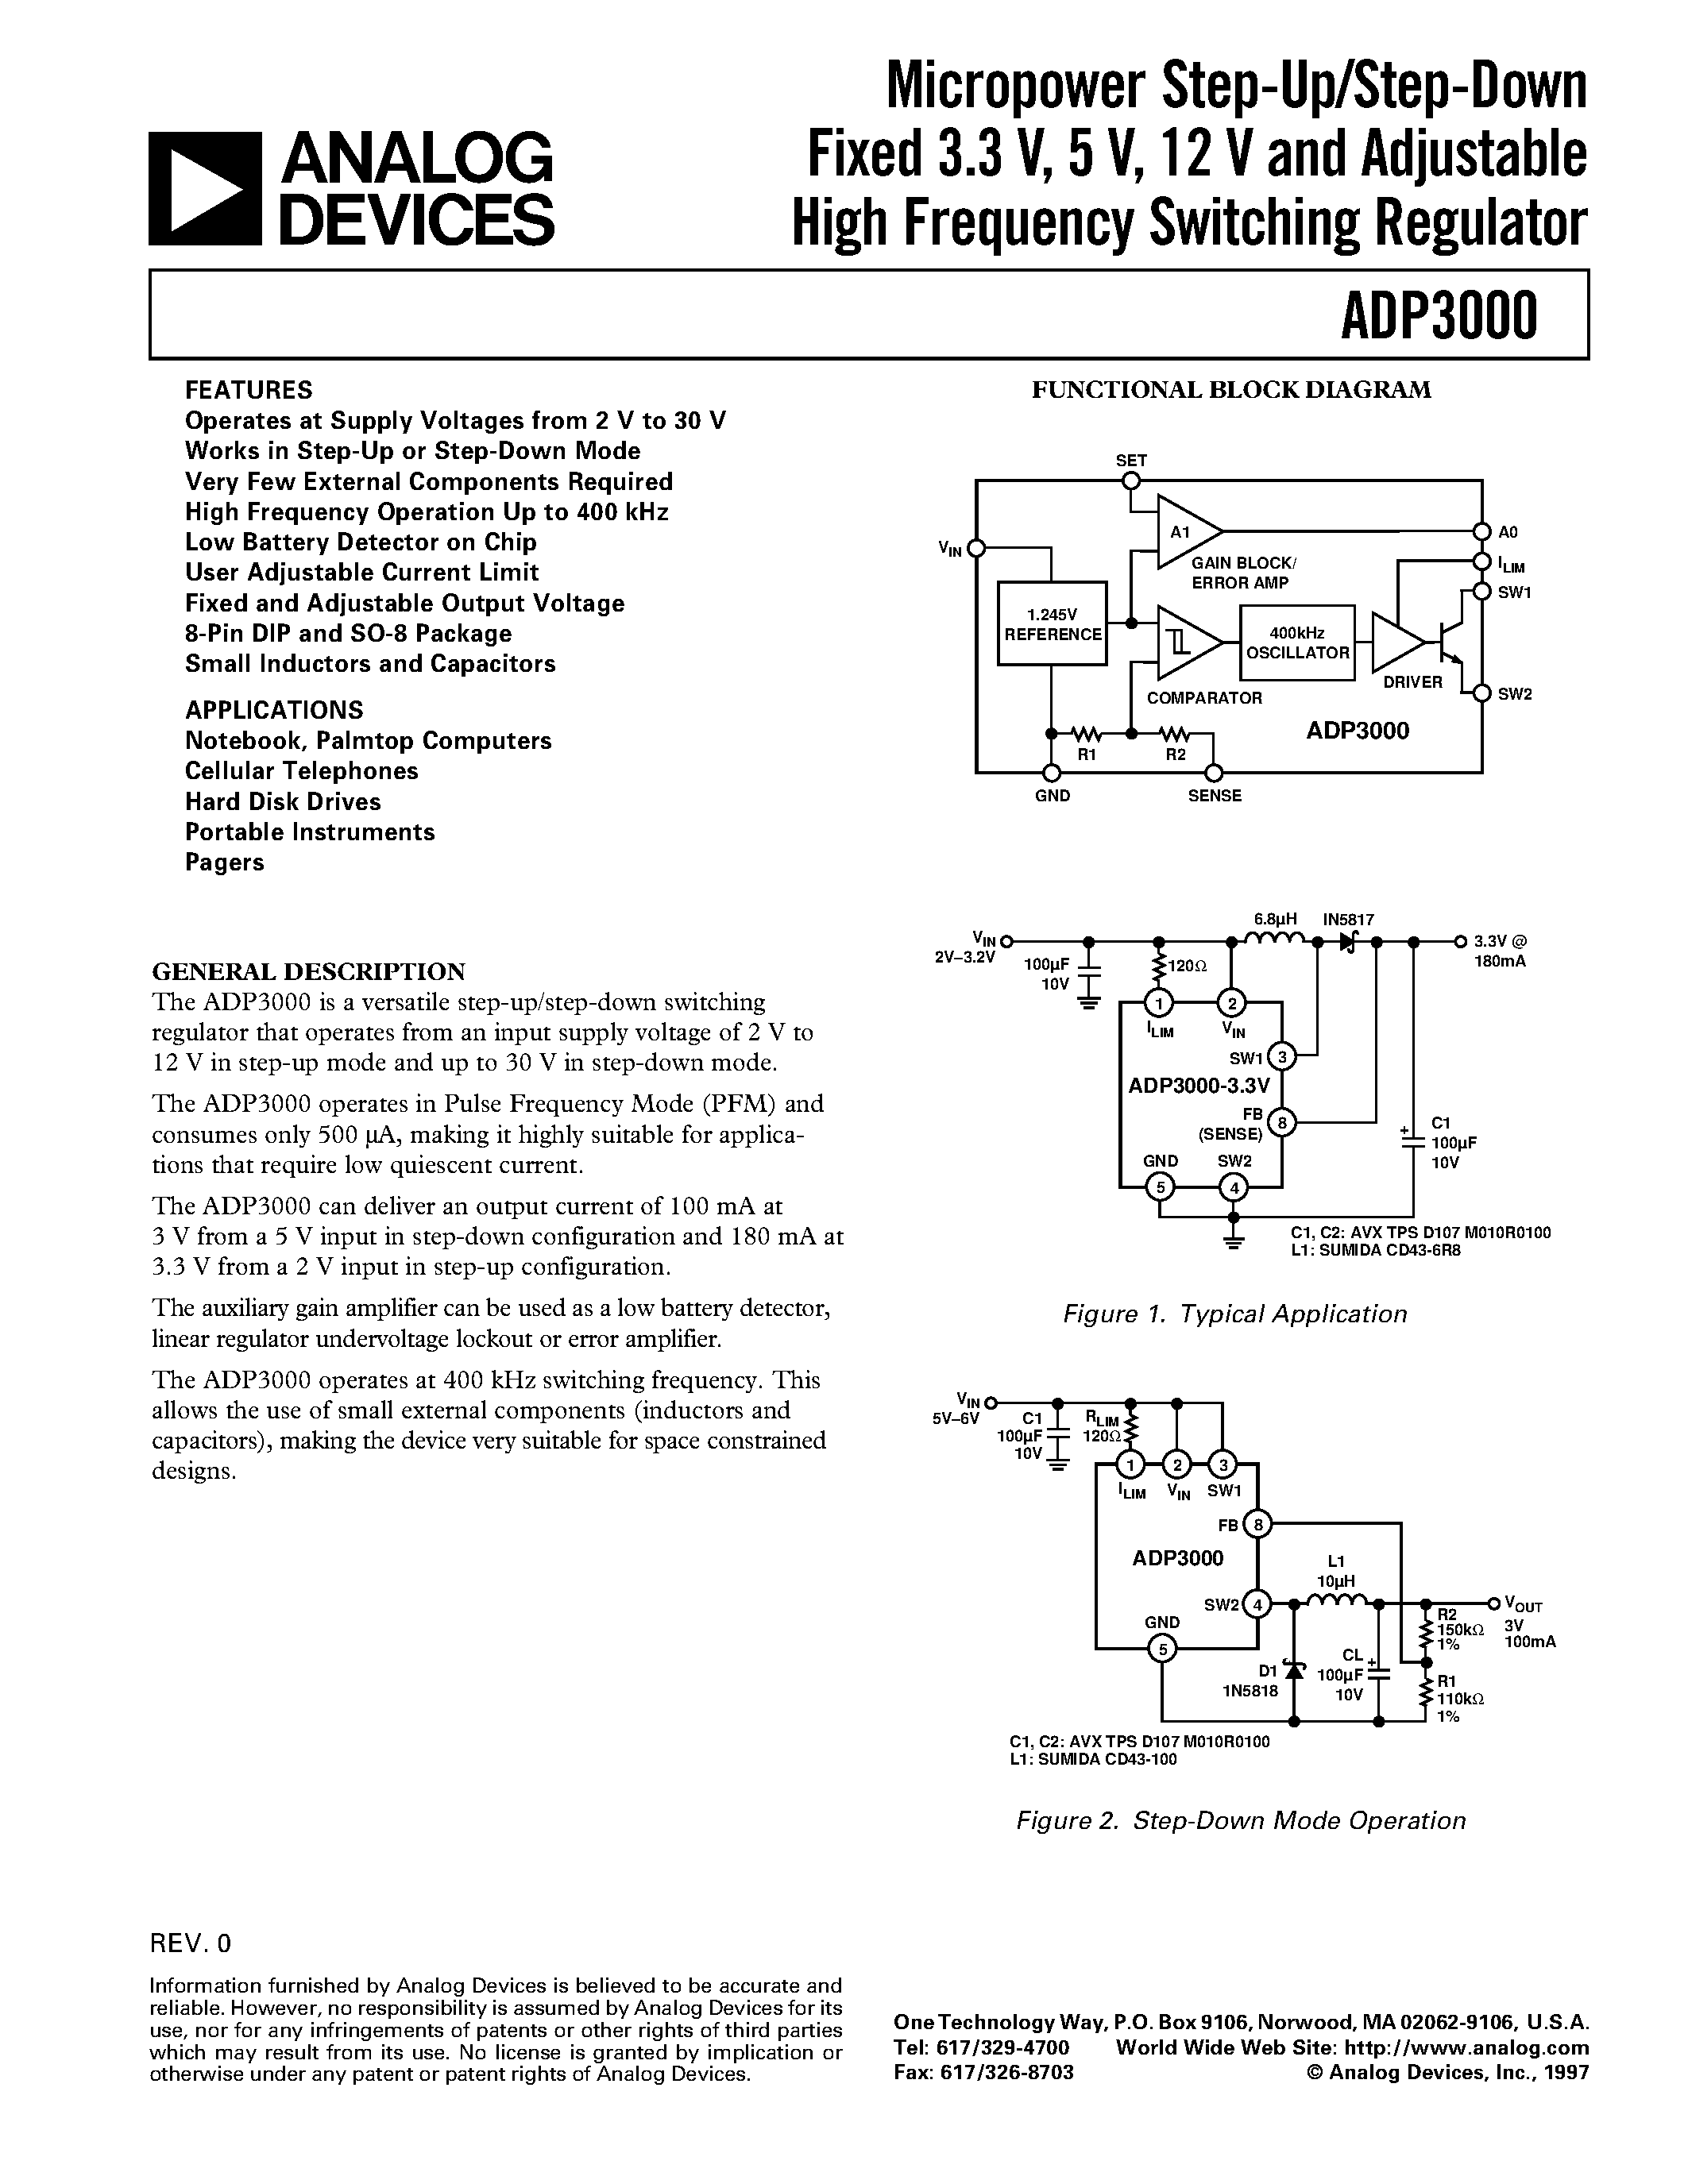 Datasheet ADP3000AN-5 - Micropower Step-Up/Step-Down Fixed 3.3 V/ 5 V/ 12 V and Adjustable High Frequency Switching Regulator page 1